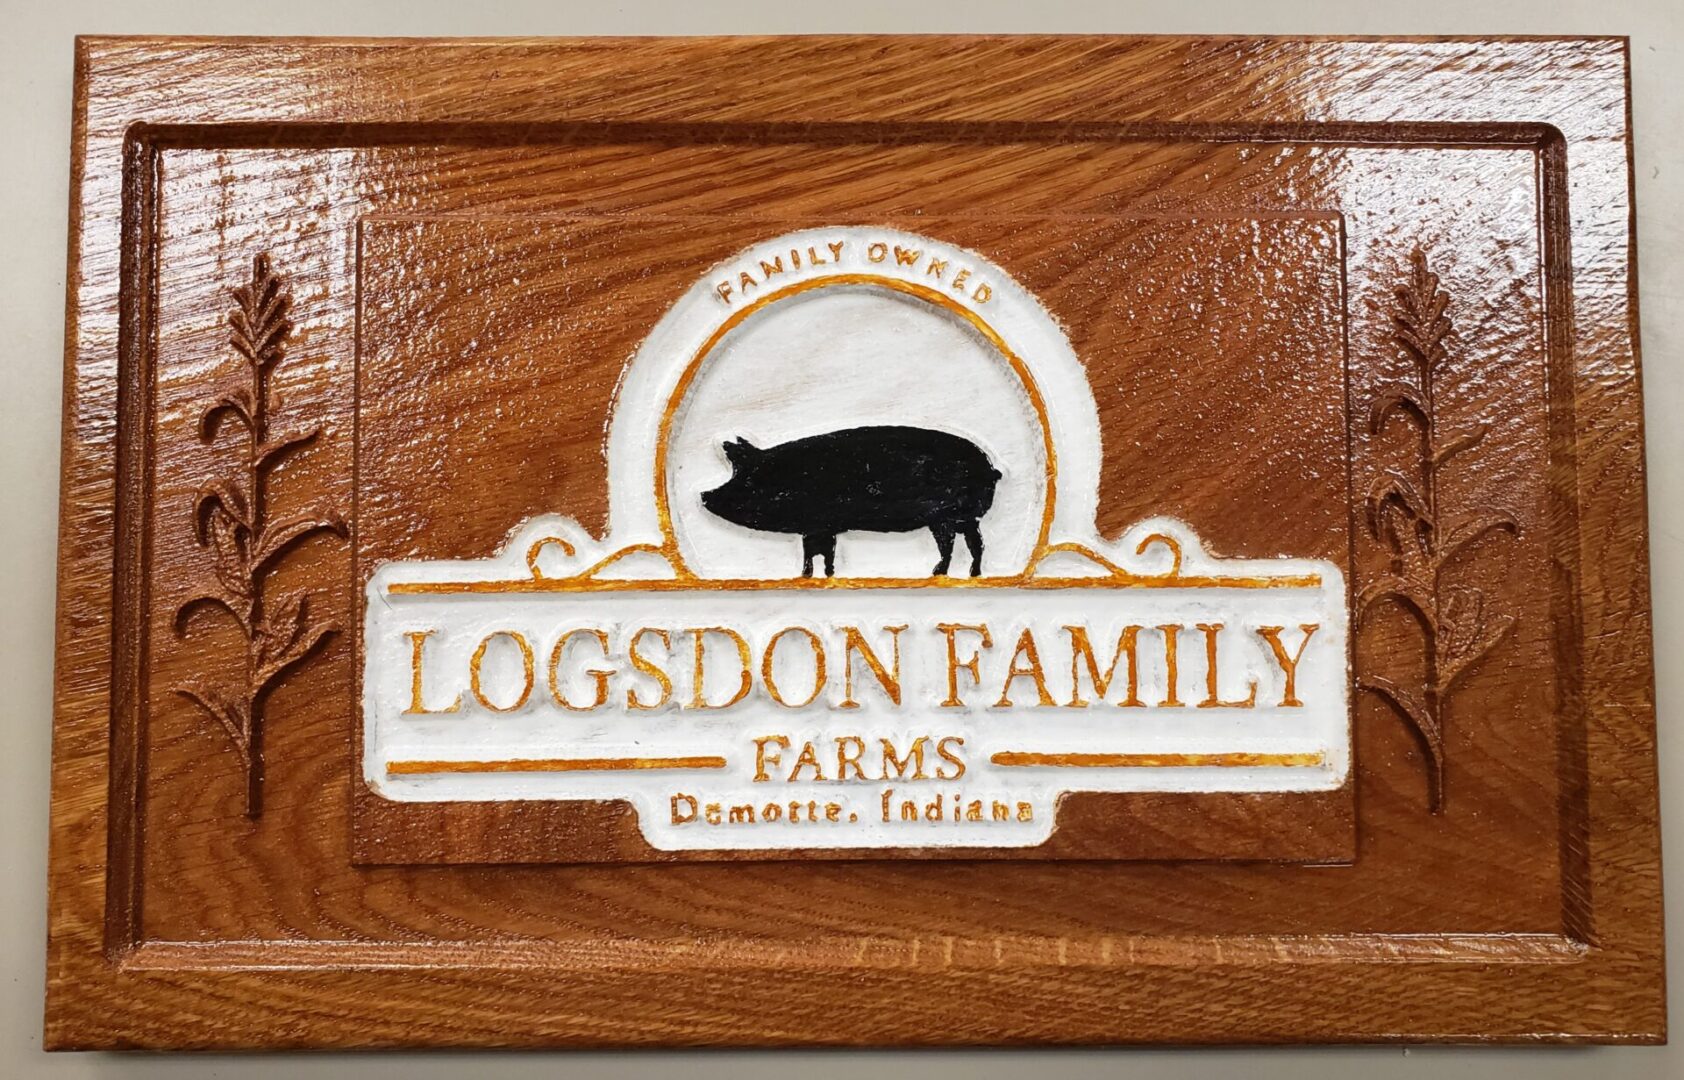 The wooden carving of logsdon family farms